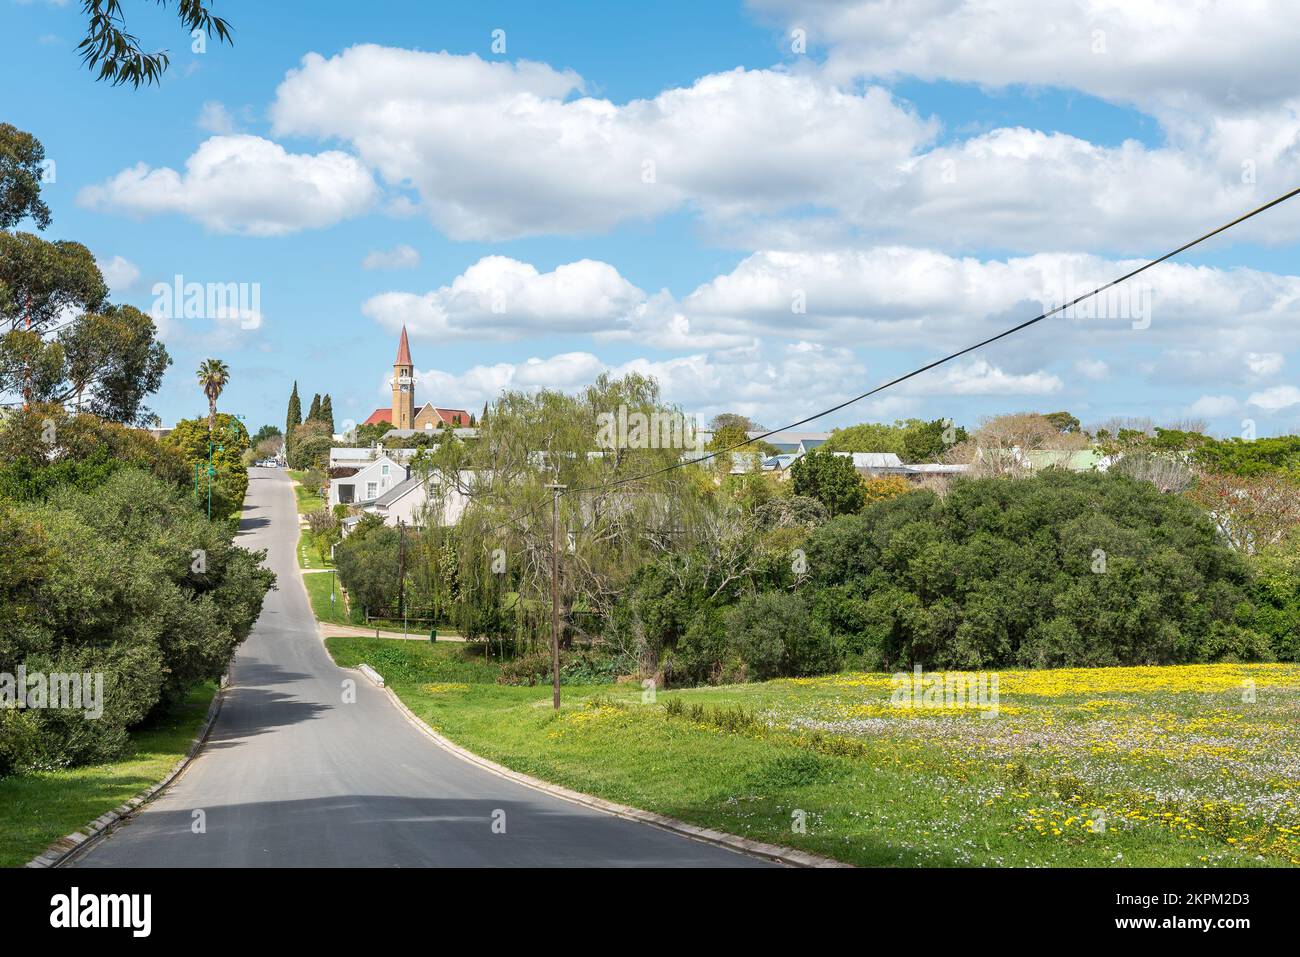 Stanford, South Africa - Sep 20, 2022: A street scene in Stanford in the Western Cape Province. The Dutch Reformed Church is visible Stock Photo